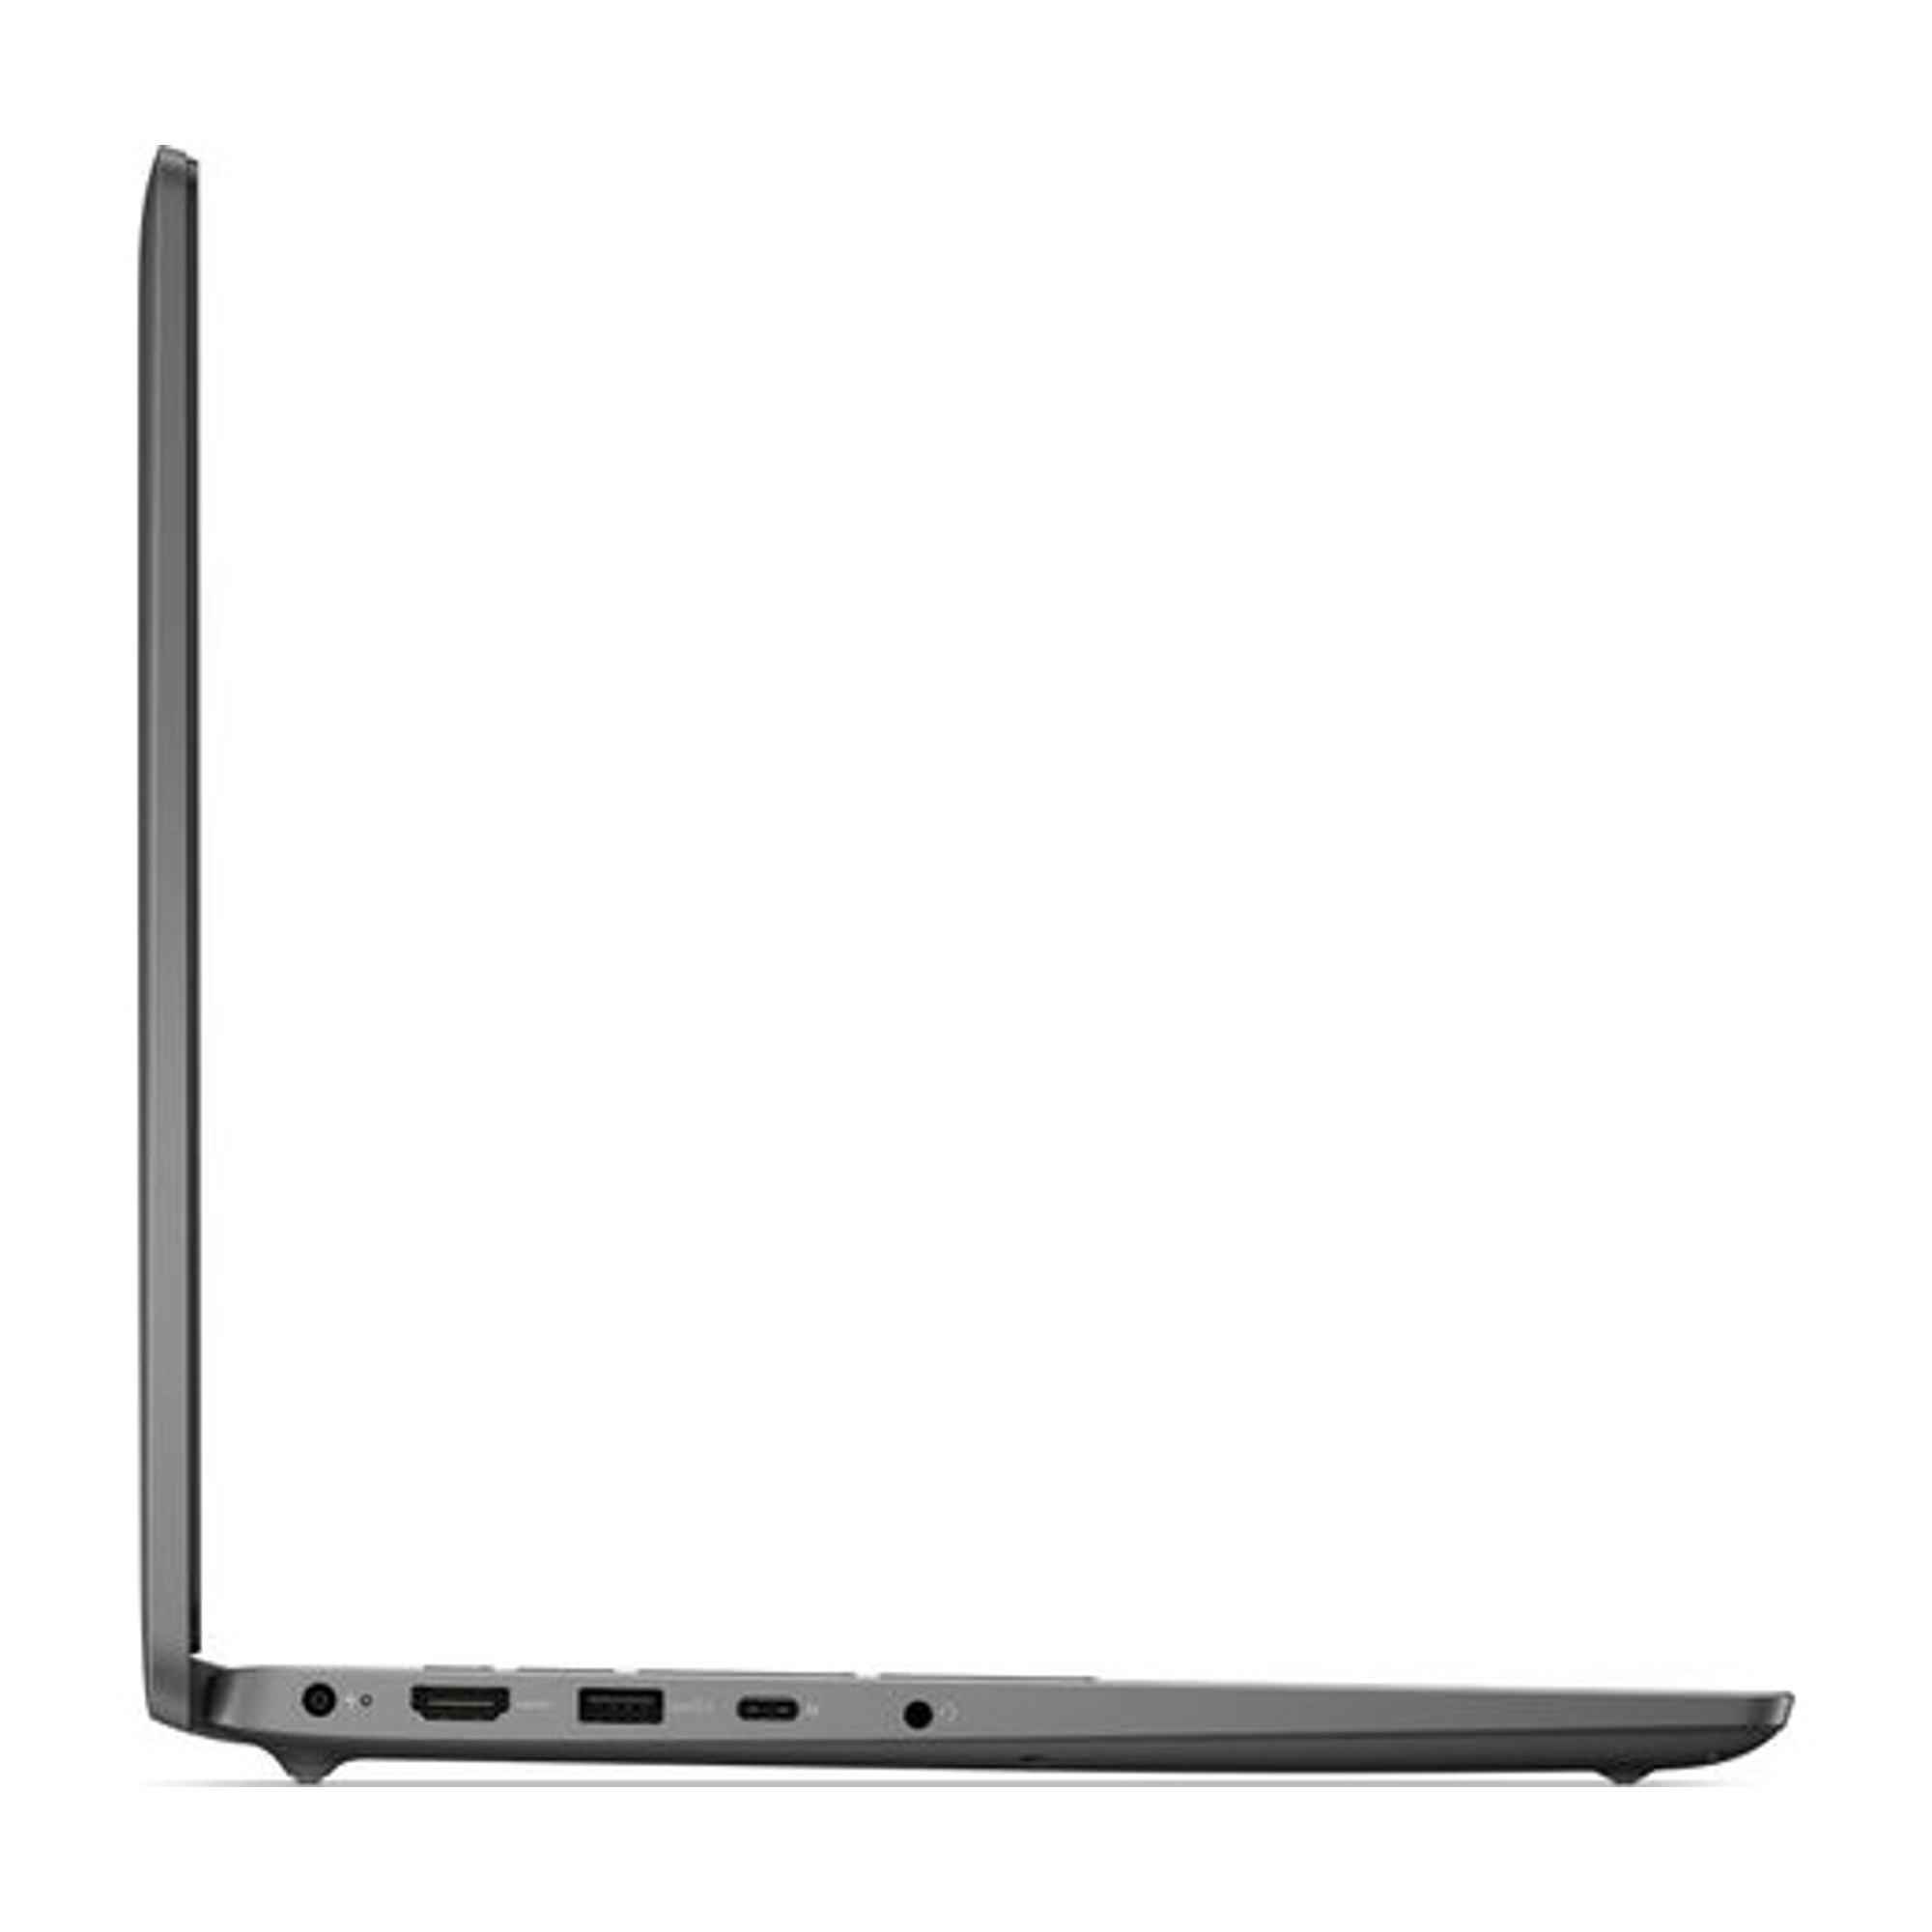 DELL L3540-12 Laptop / Notebook 3